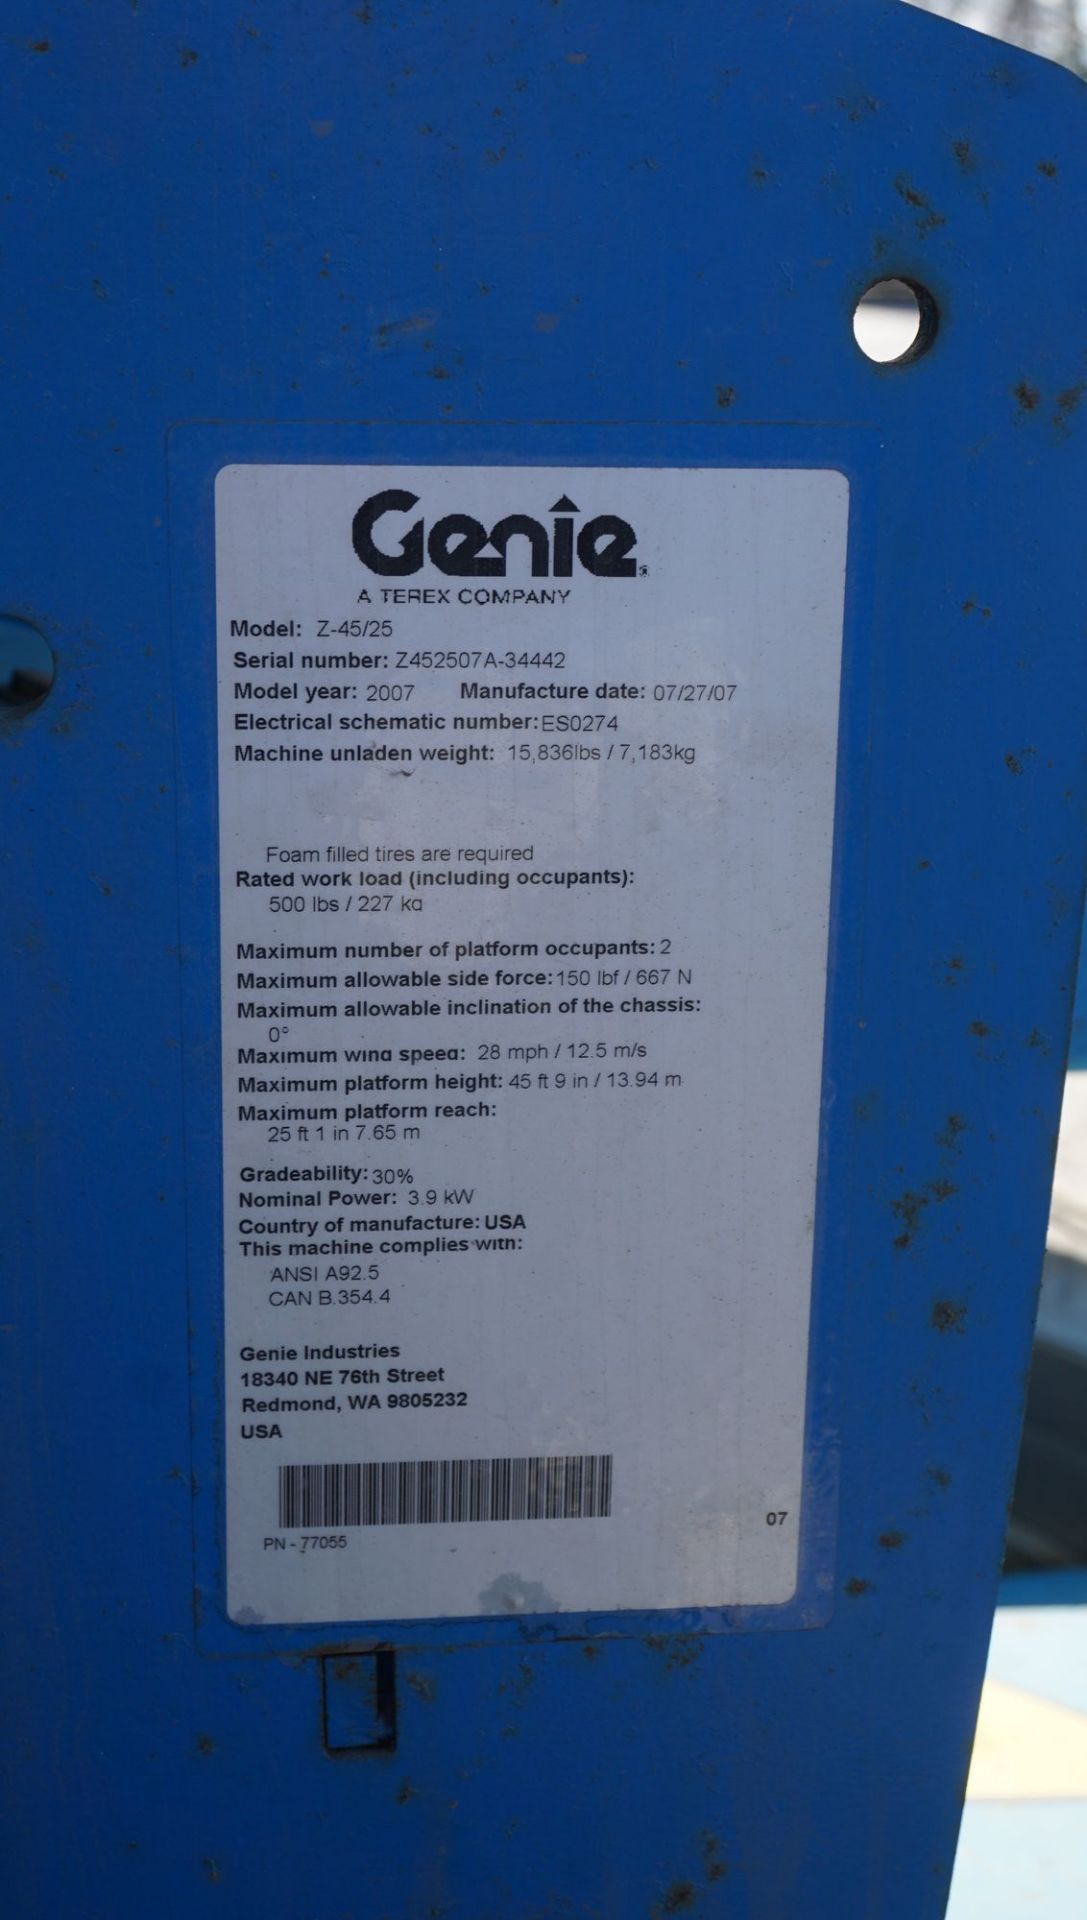 2007 GENIE MODEL Z-45/25 BATTERY POWERED ARTICULATING BOOM LIFT, 45' MAX PLATFORM HEIGHT - 51' - Image 8 of 8